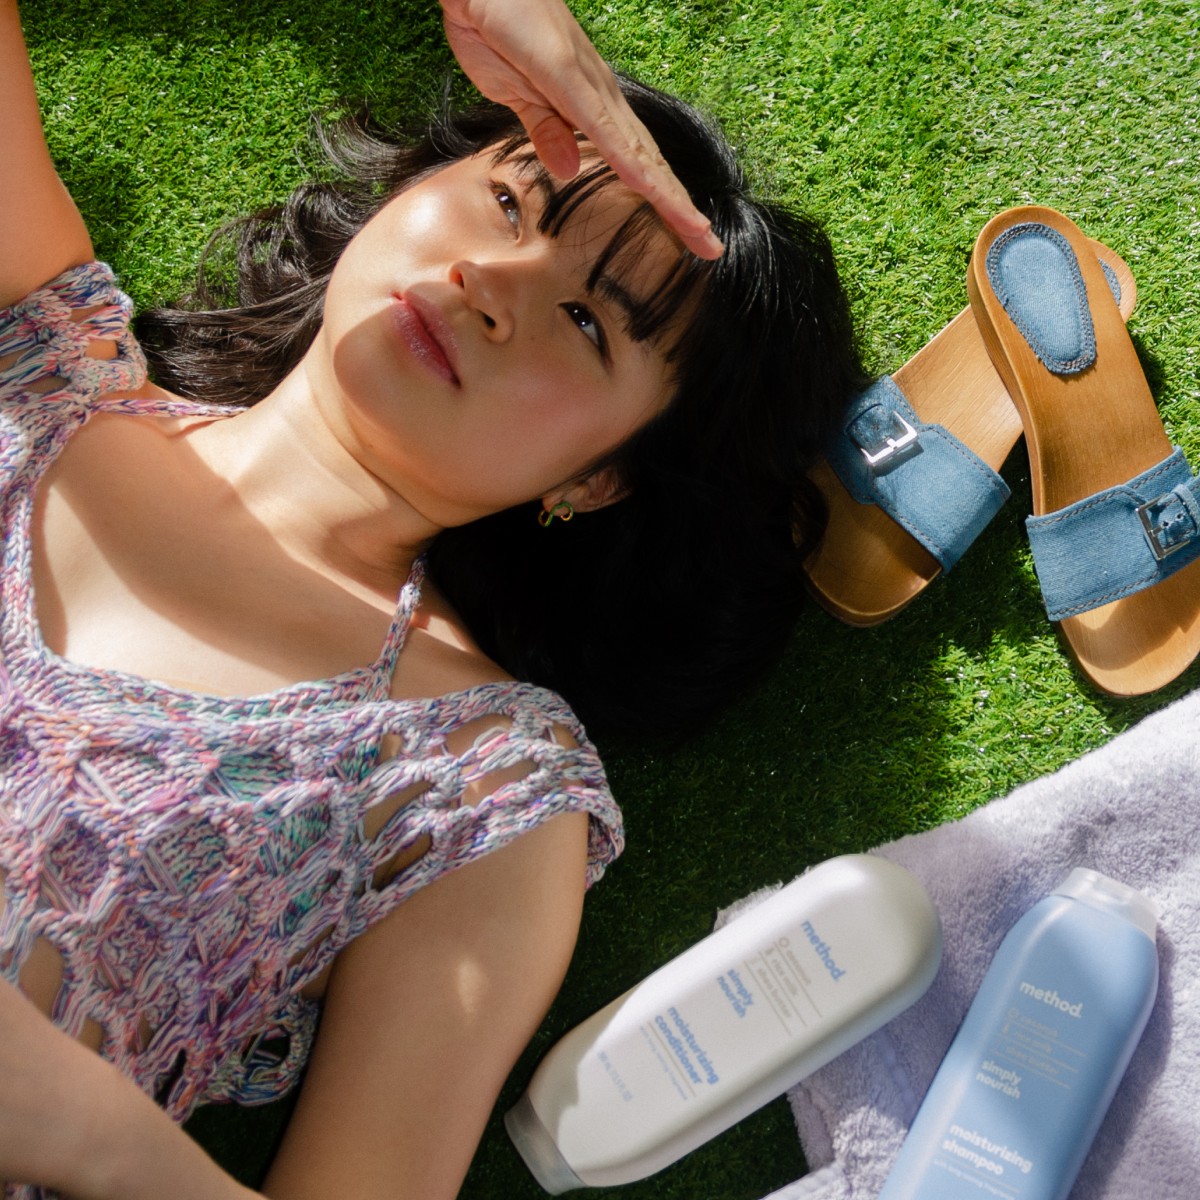 Coachella fan laying grass with method products next to her